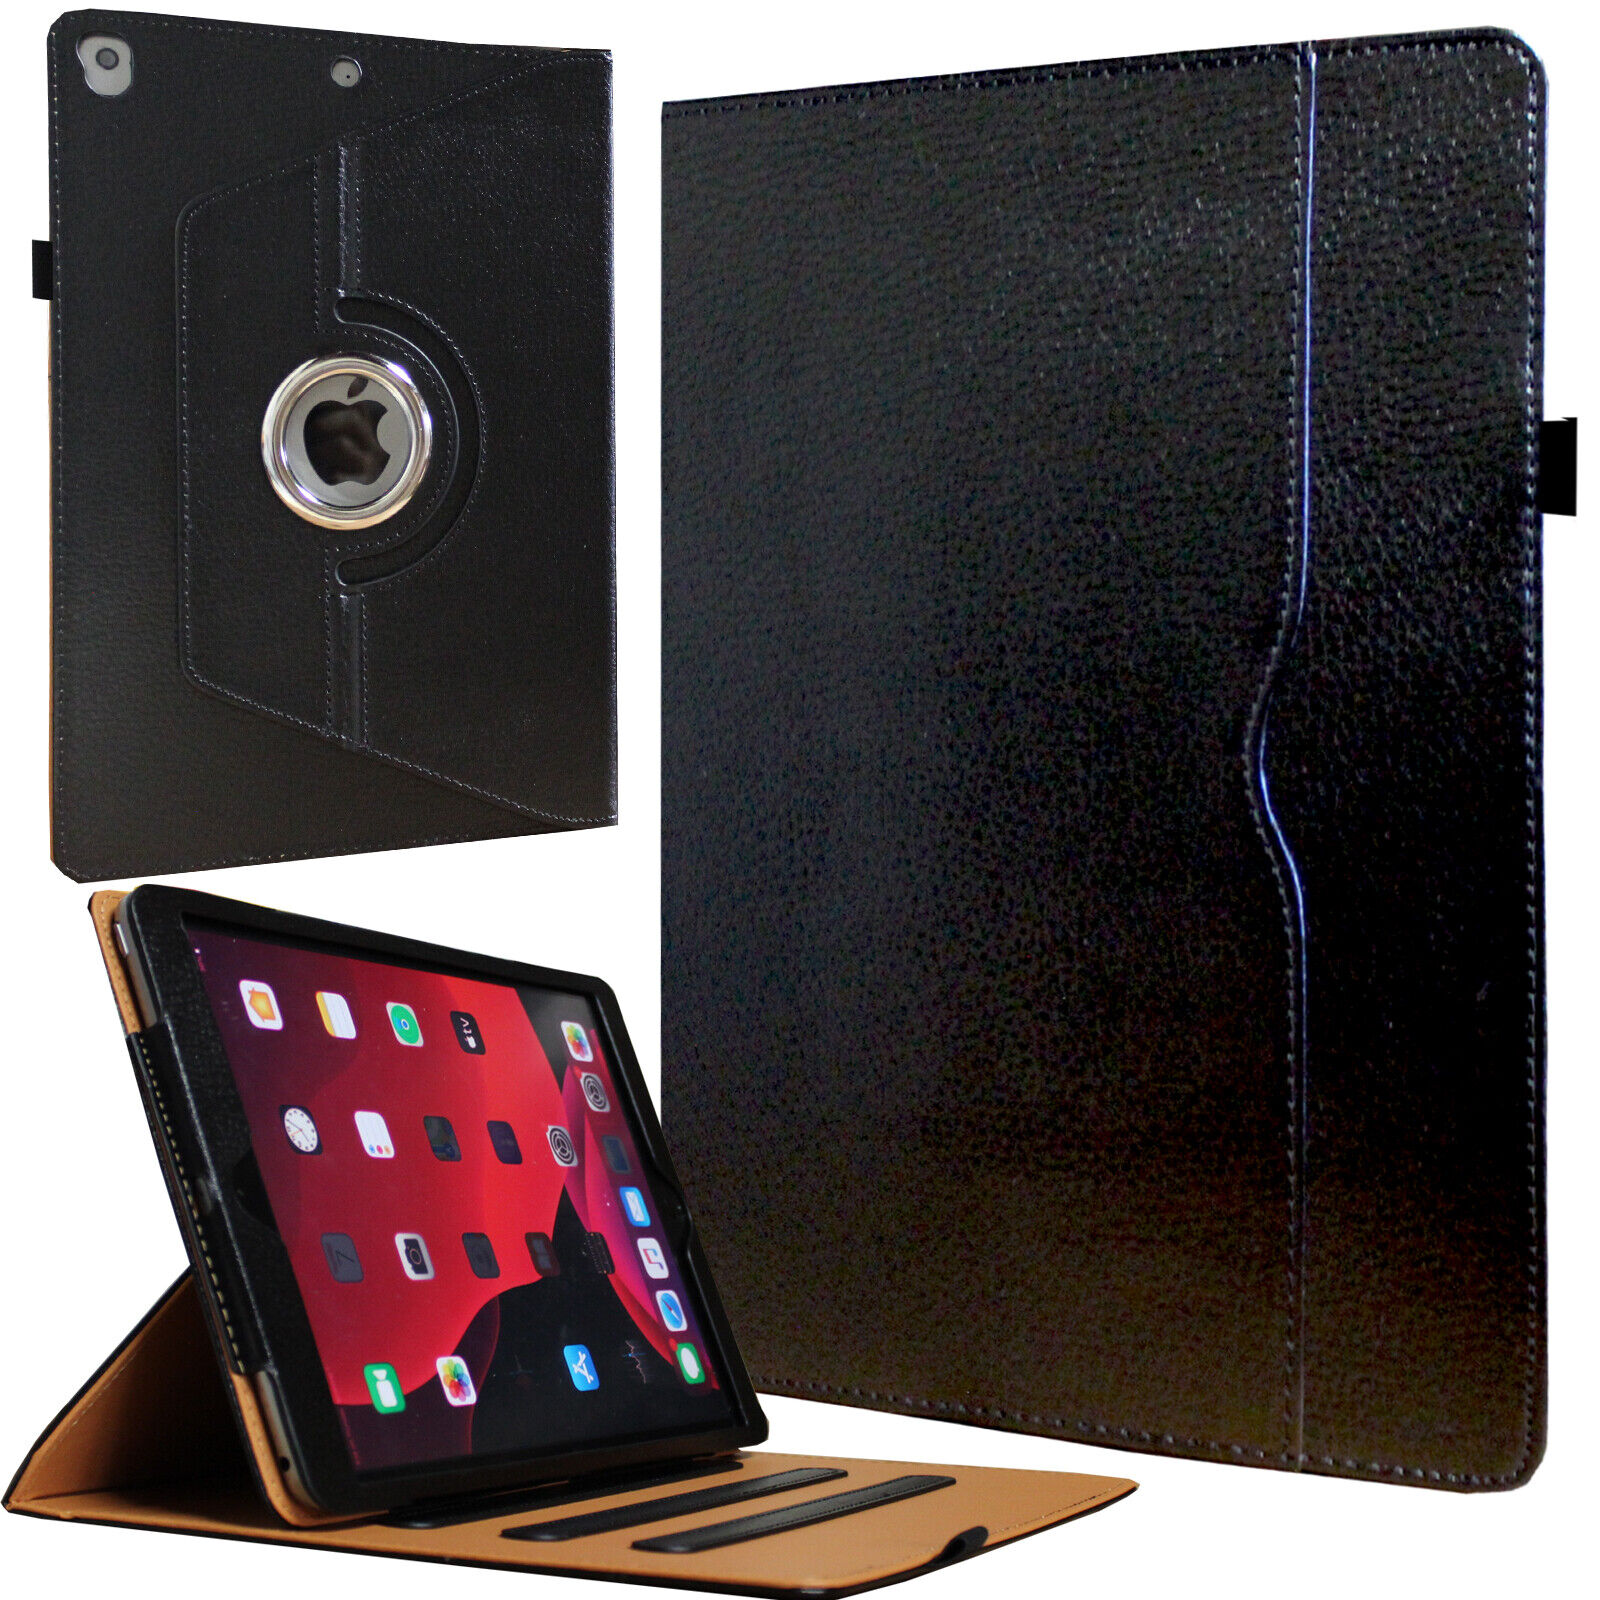 360 Rotating Smart Case Magnetic Cover with Pocket Pen Holder for Old &New iPad 